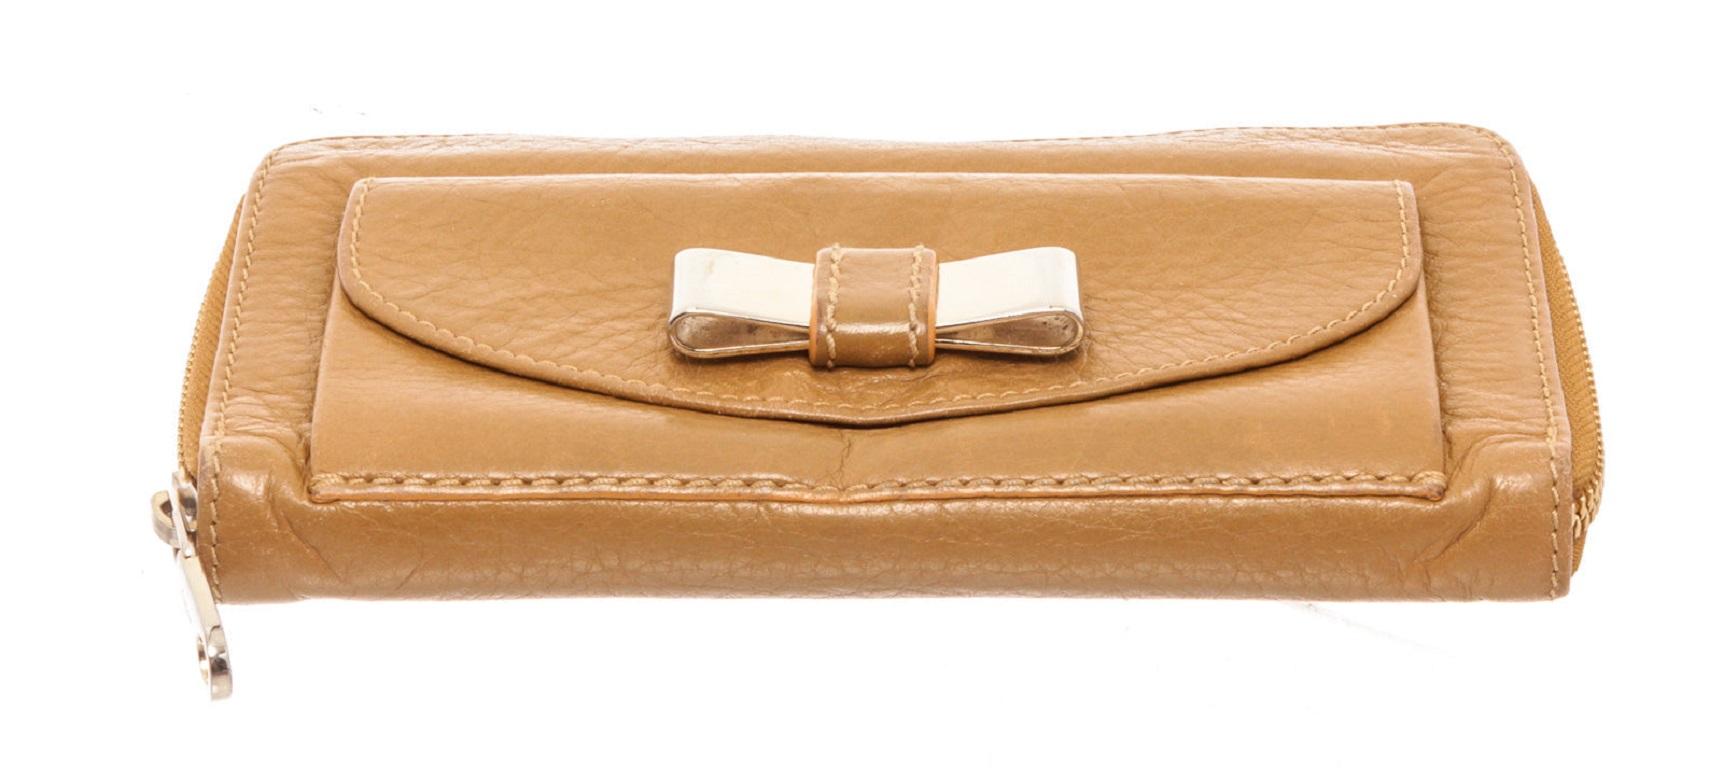 Women's Chloe Brown Leather Lily Zip Wallet with gold-tone hardware, single exterior